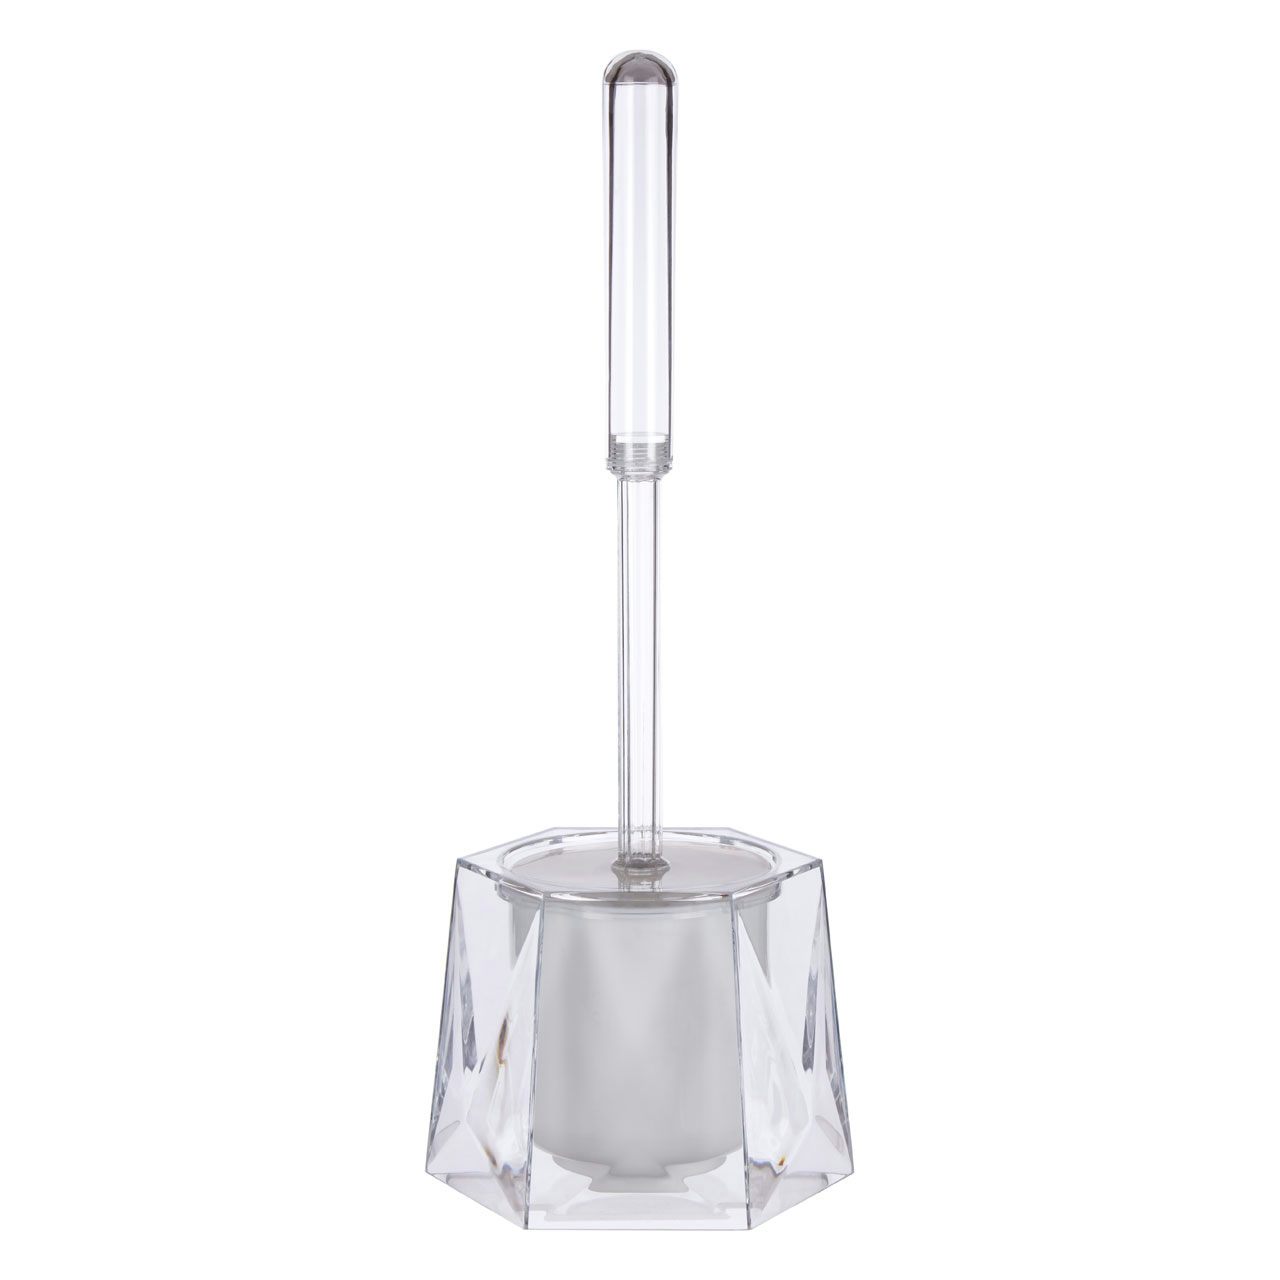 Accents Dow clear acrylic toilet brush and holder